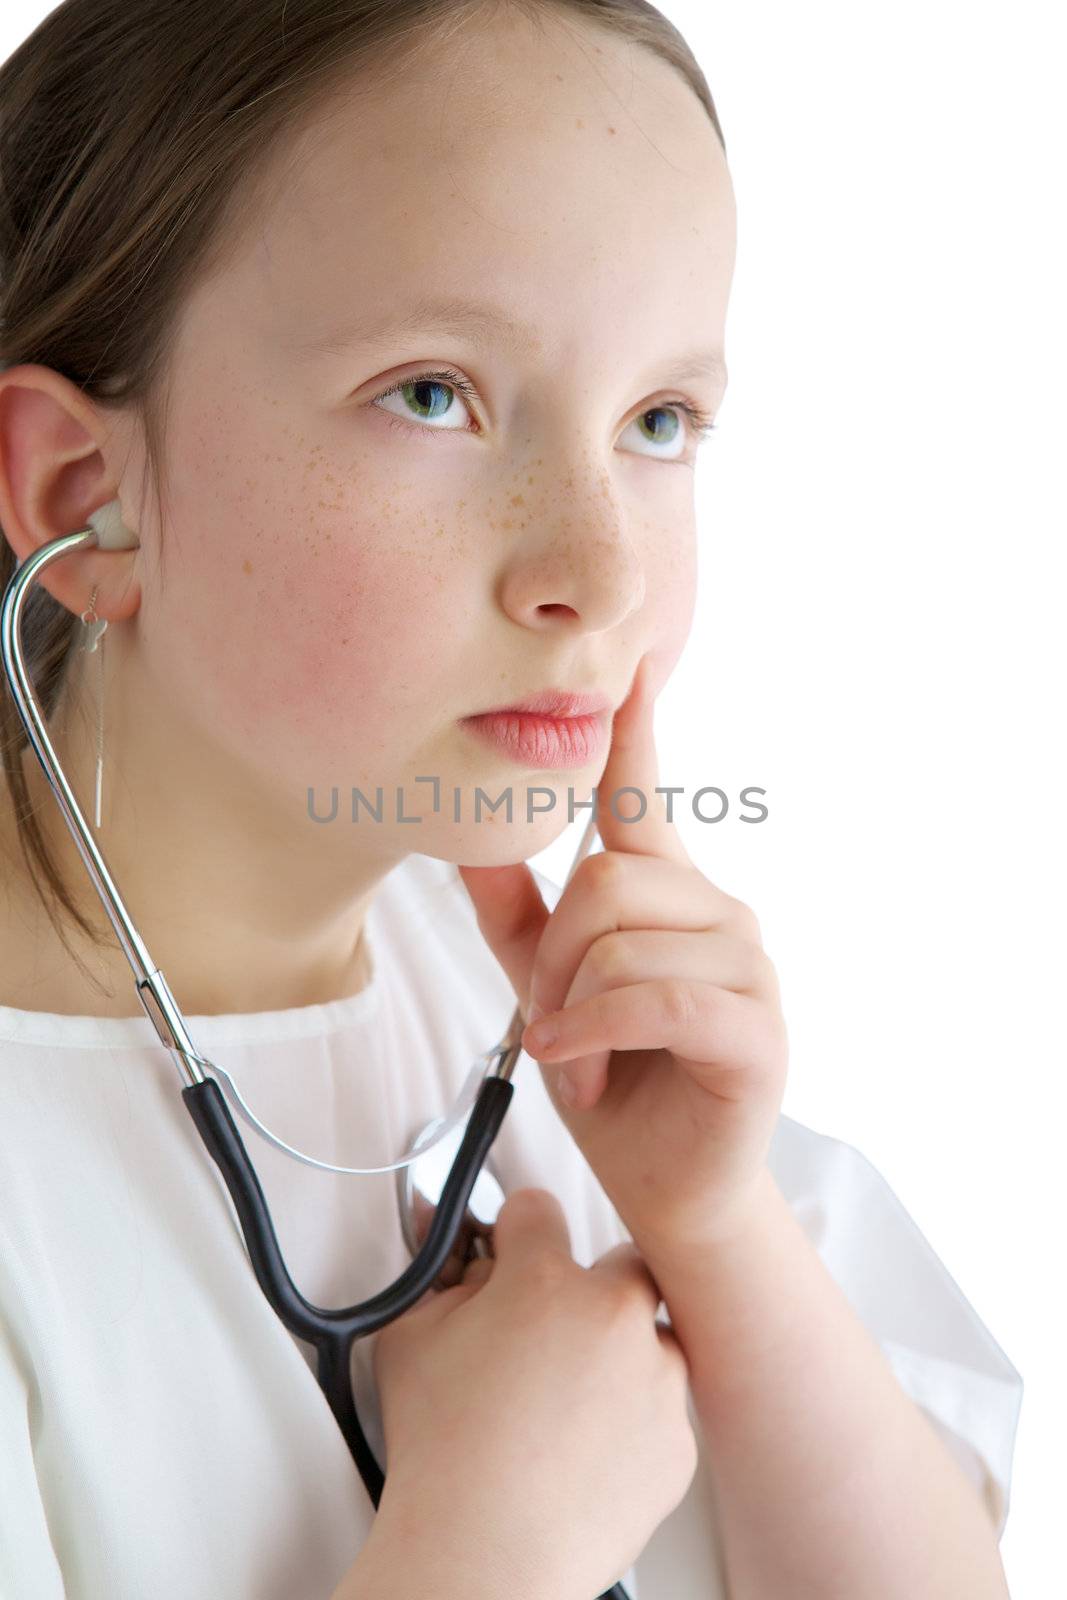 Little girl with a white coat and stethoscope